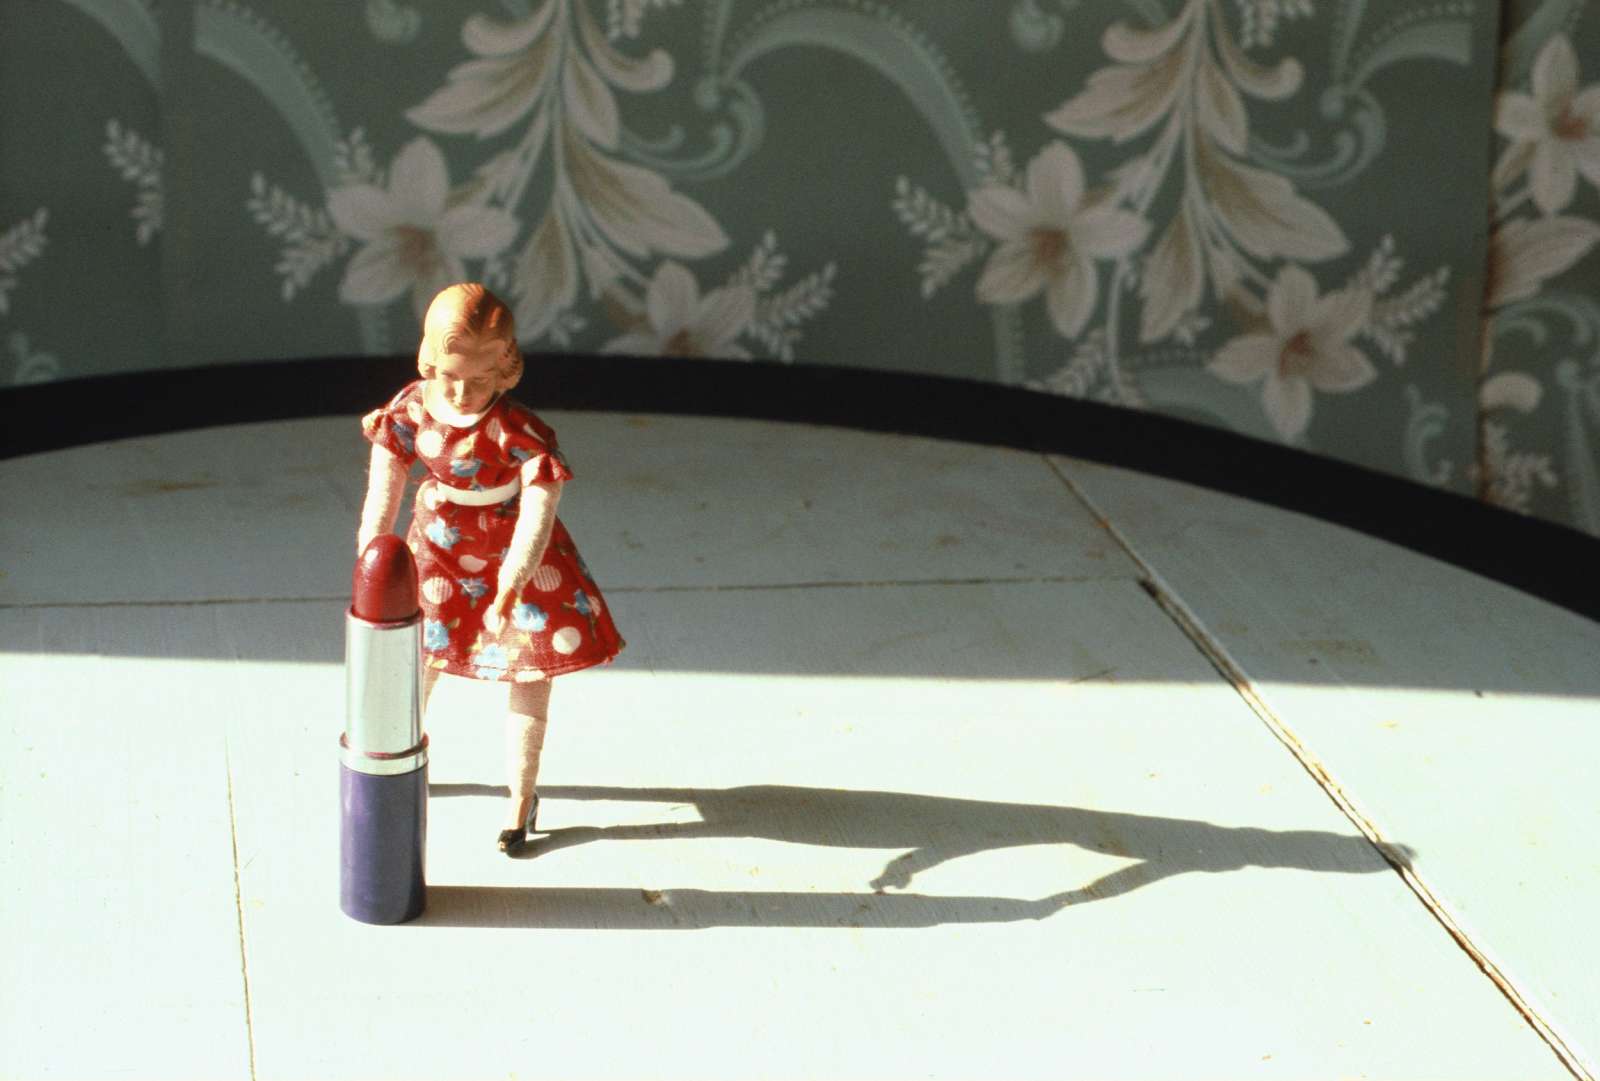 Laurie Simmons, Pushing Lipstick (Full Shadow), 1979